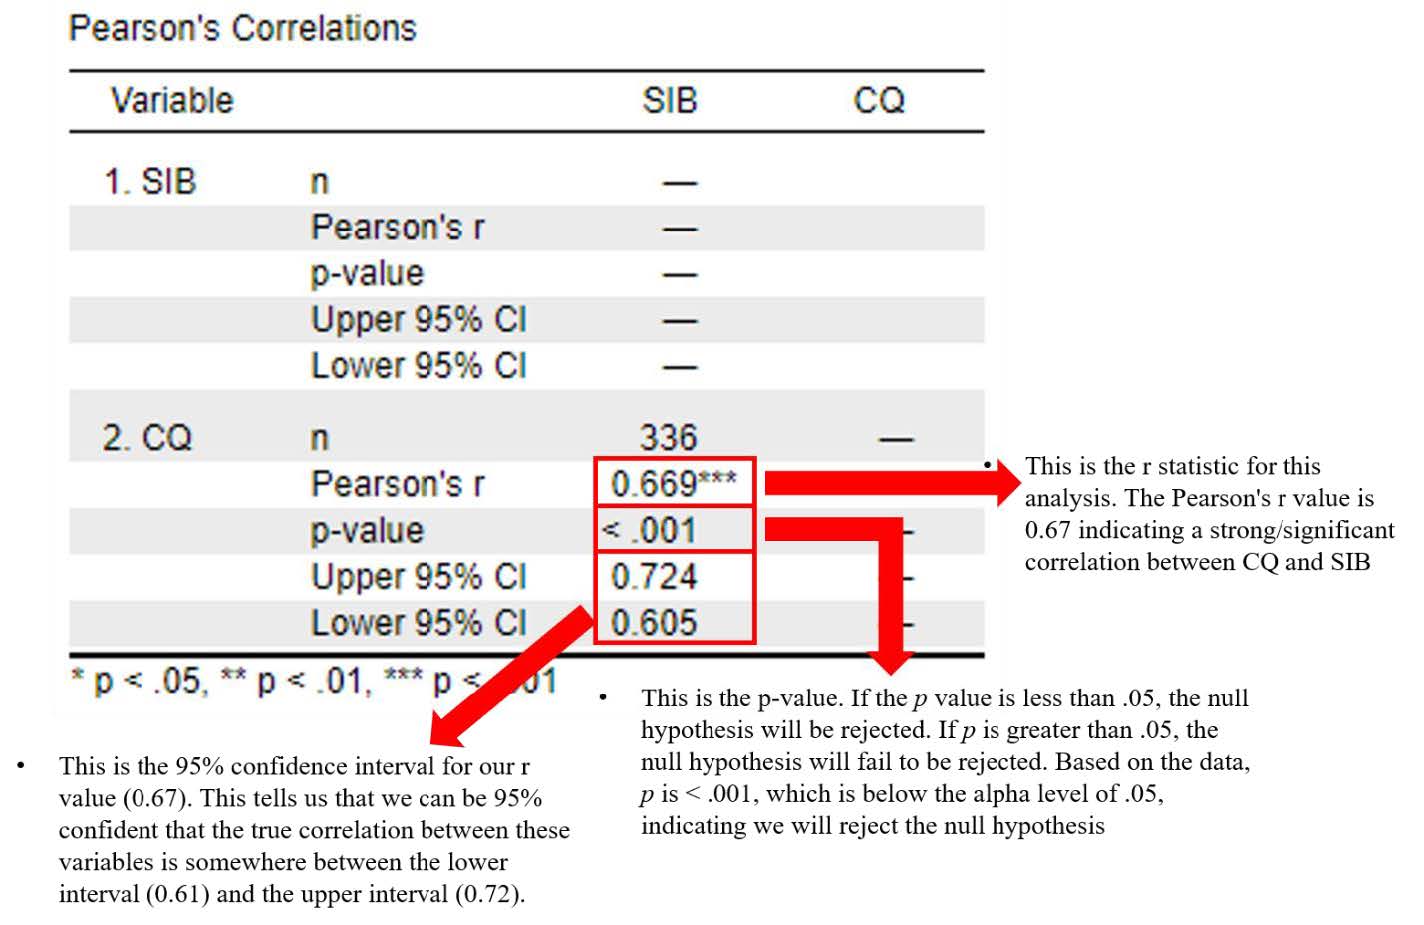 Displays a basic correlation matrix between the two variables. Relevant output that is discussed in text is circled with a reminder of proper interpretation.